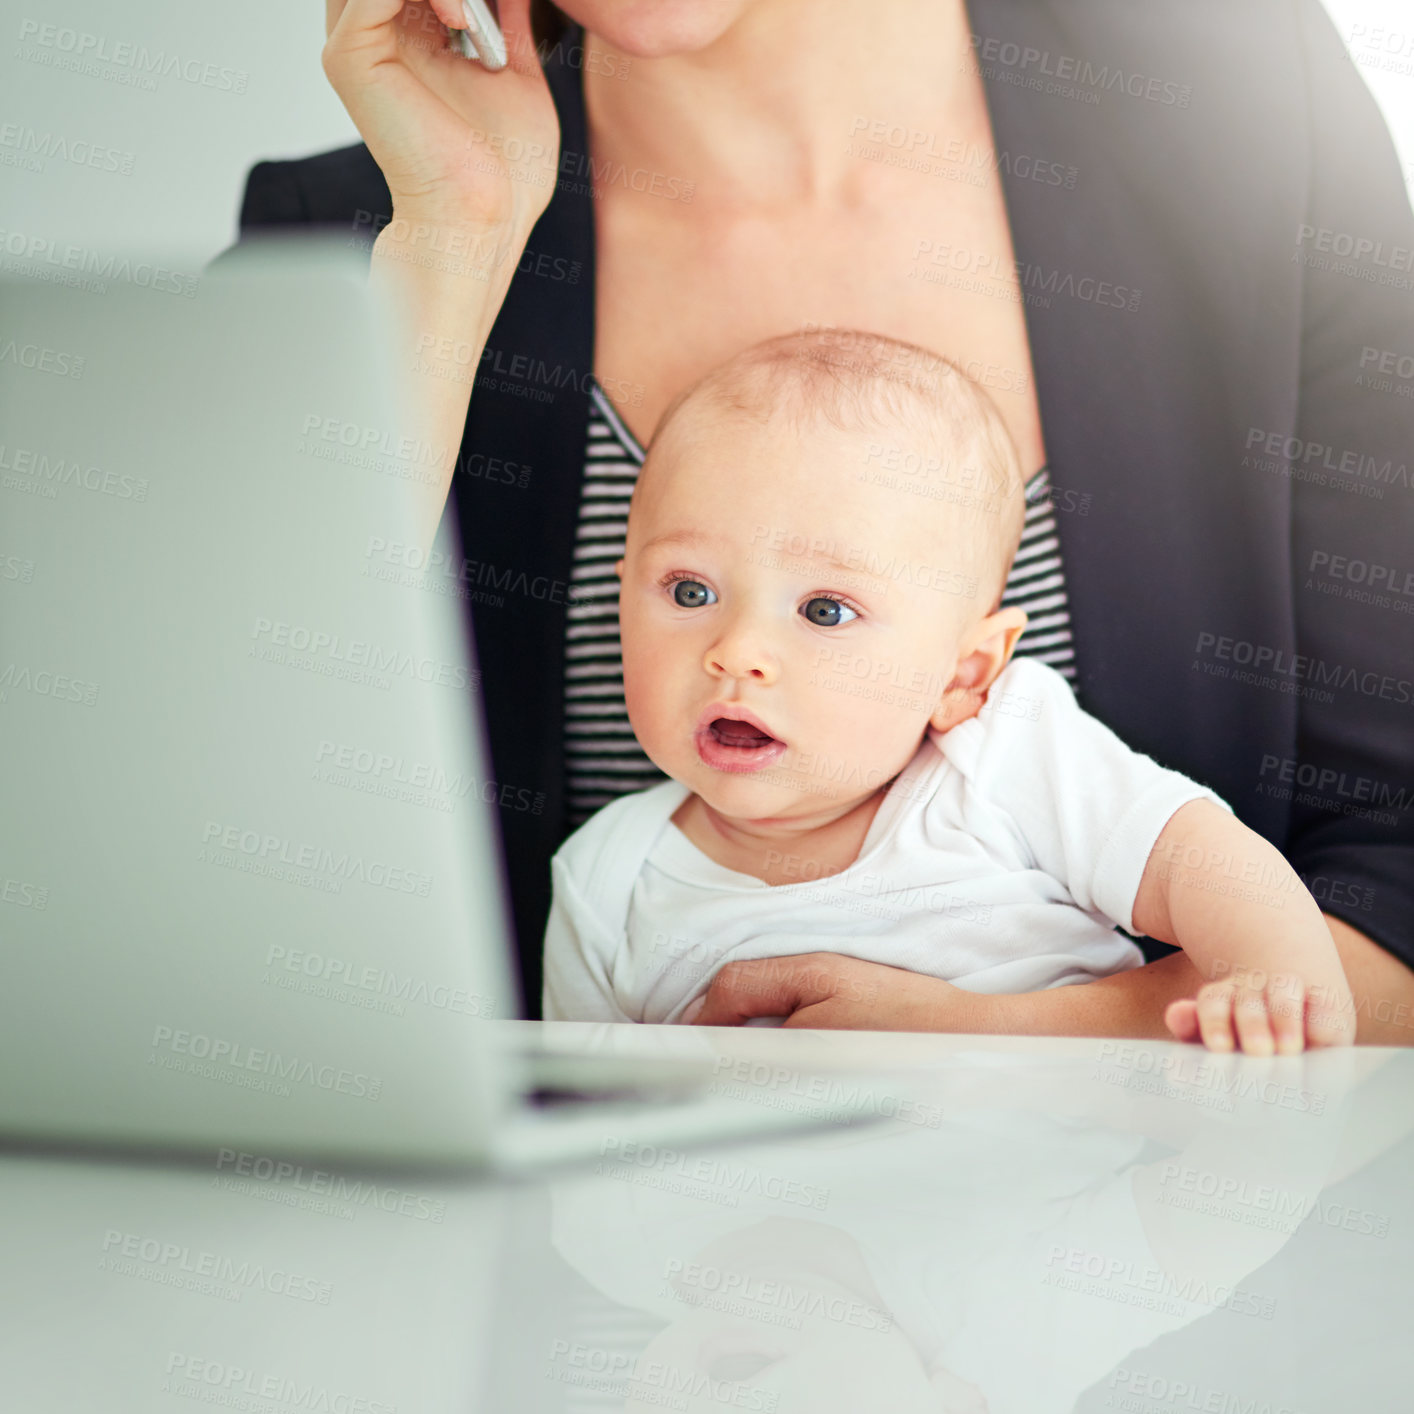 Buy stock photo Shot of an adorable baby boy curious about his mother’s work on her computer